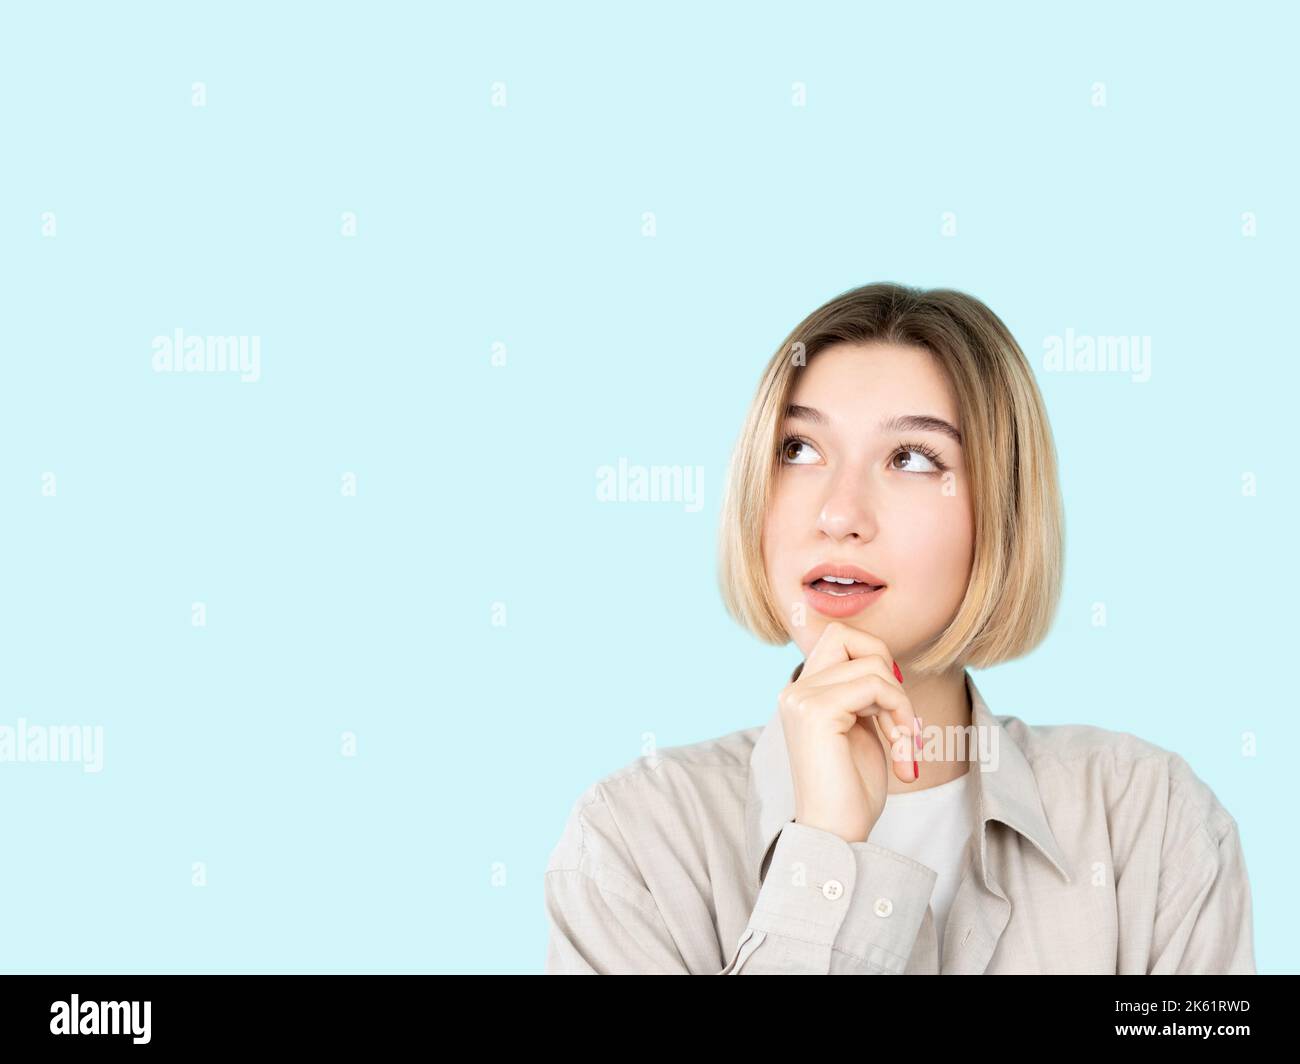 choose product puzzled woman proposition offer Stock Photo